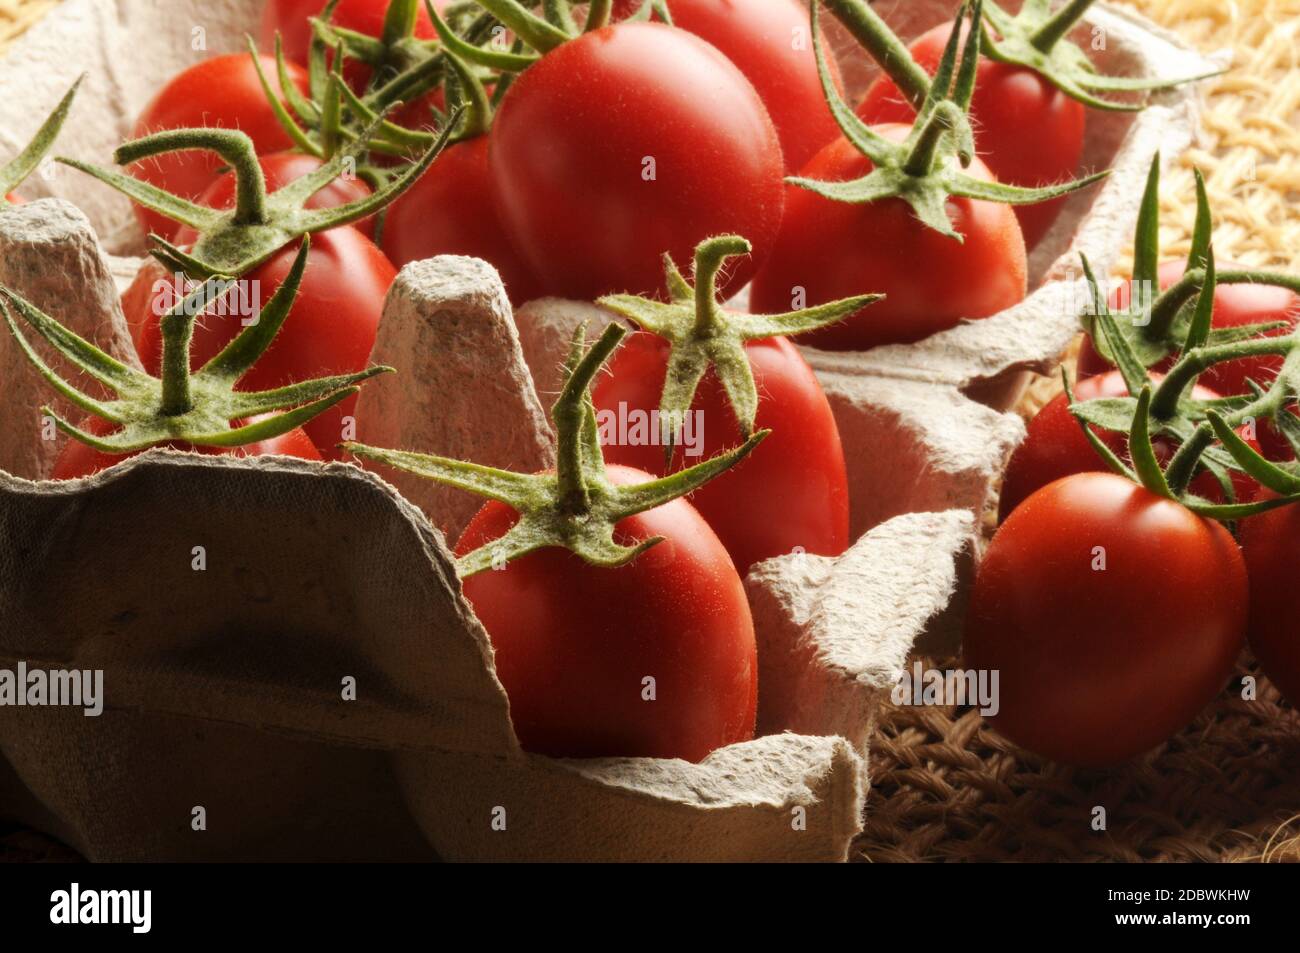 San Marzano tomatoes in the box for eggs Stock Photo